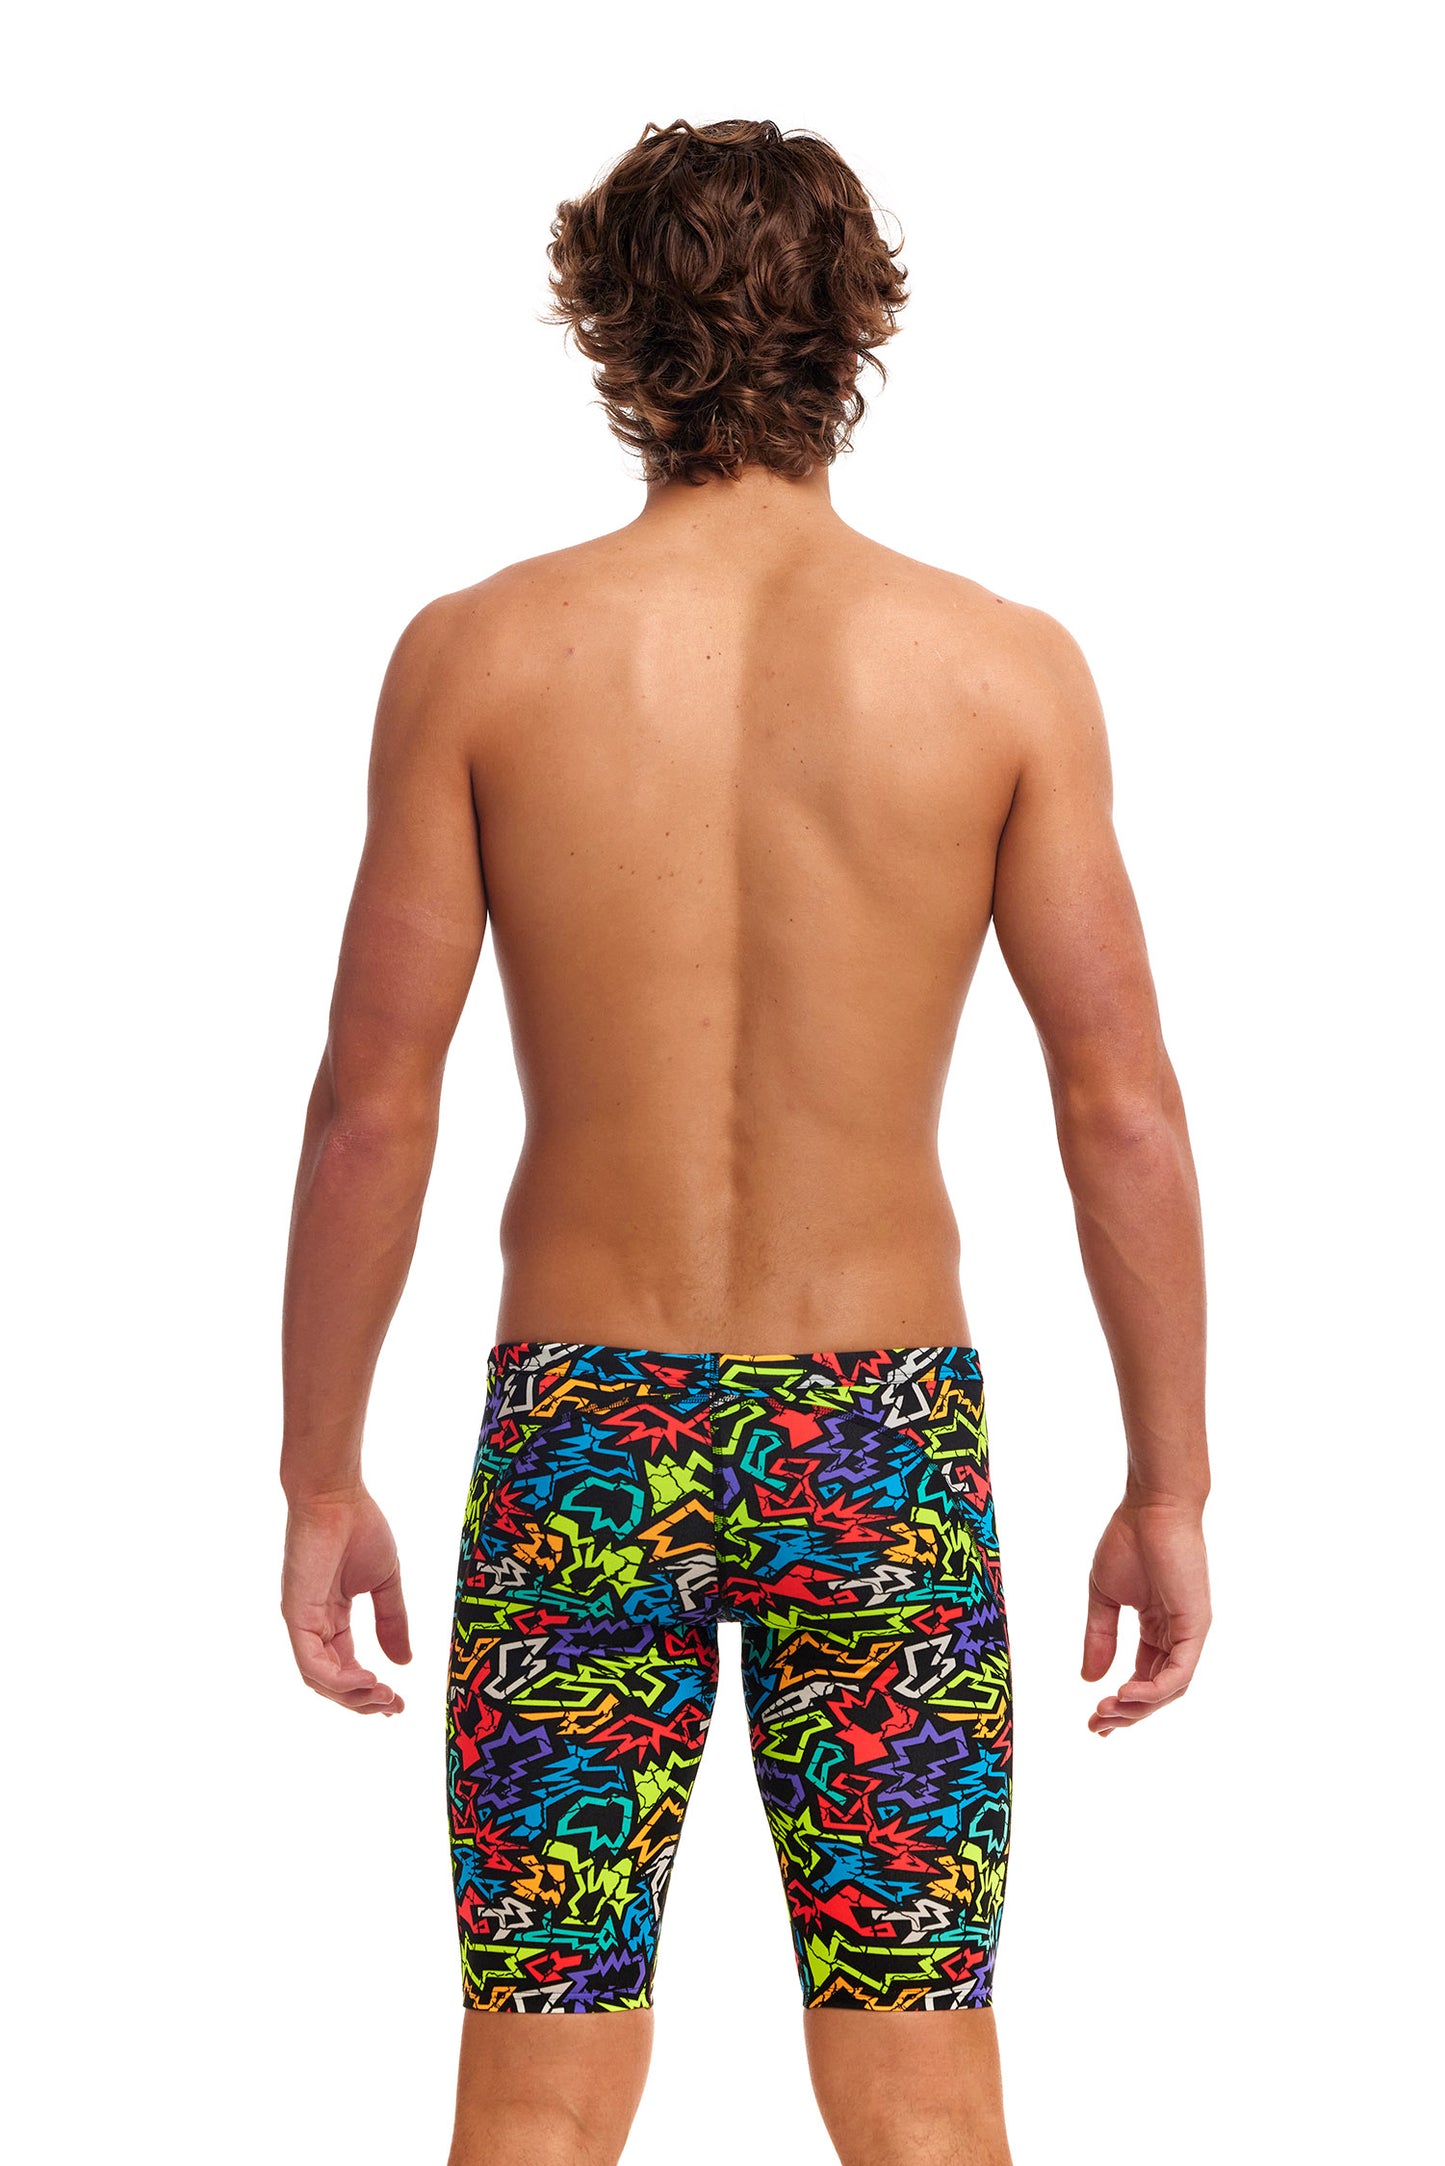 NEW! Funky Trunks Mens Eco Training Jammers Funk Me